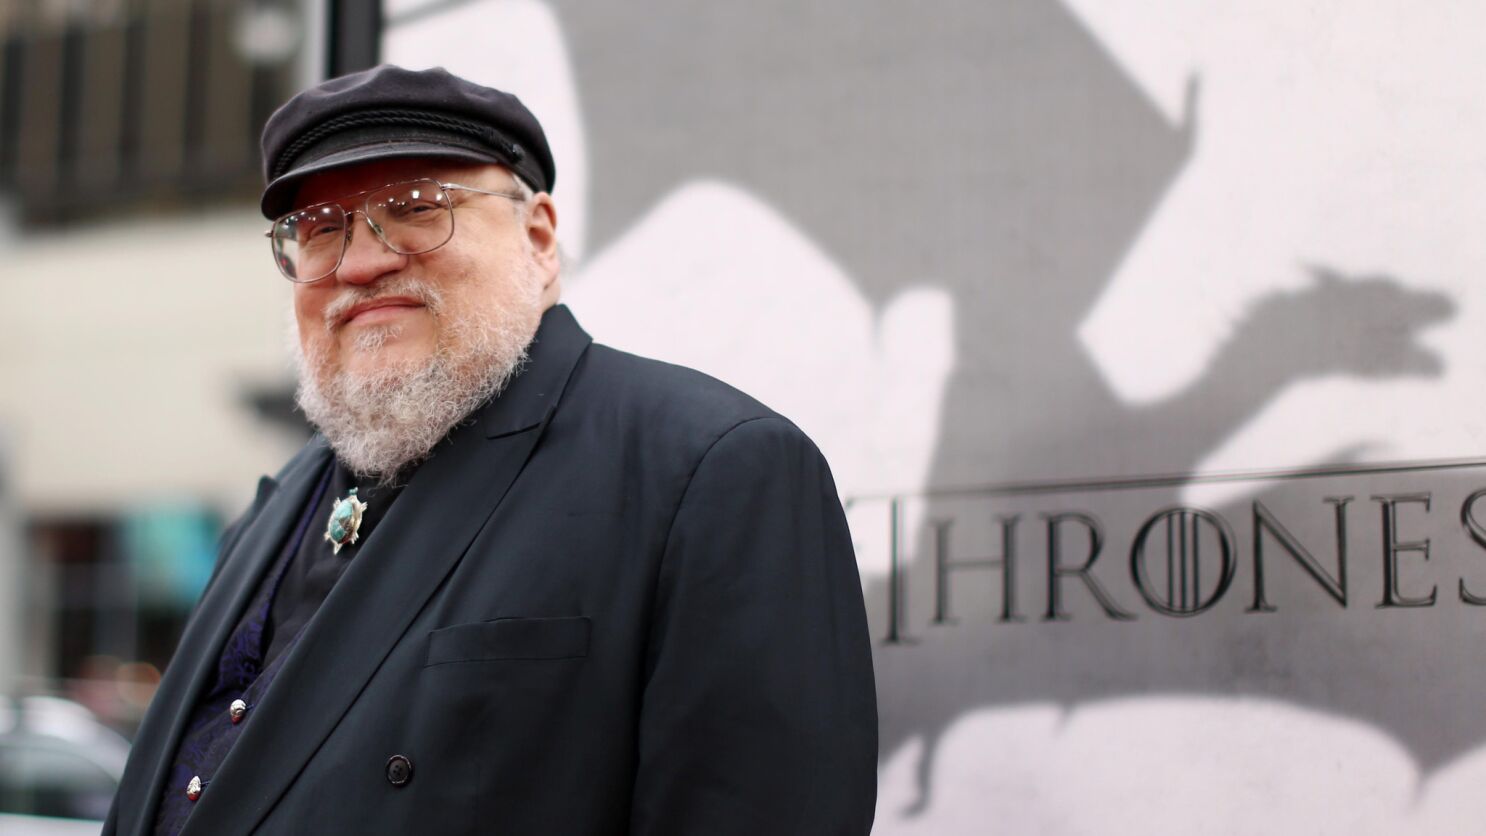 Attention of Thrones' fans: George R.R. Martin has another TV project in the Angeles Times